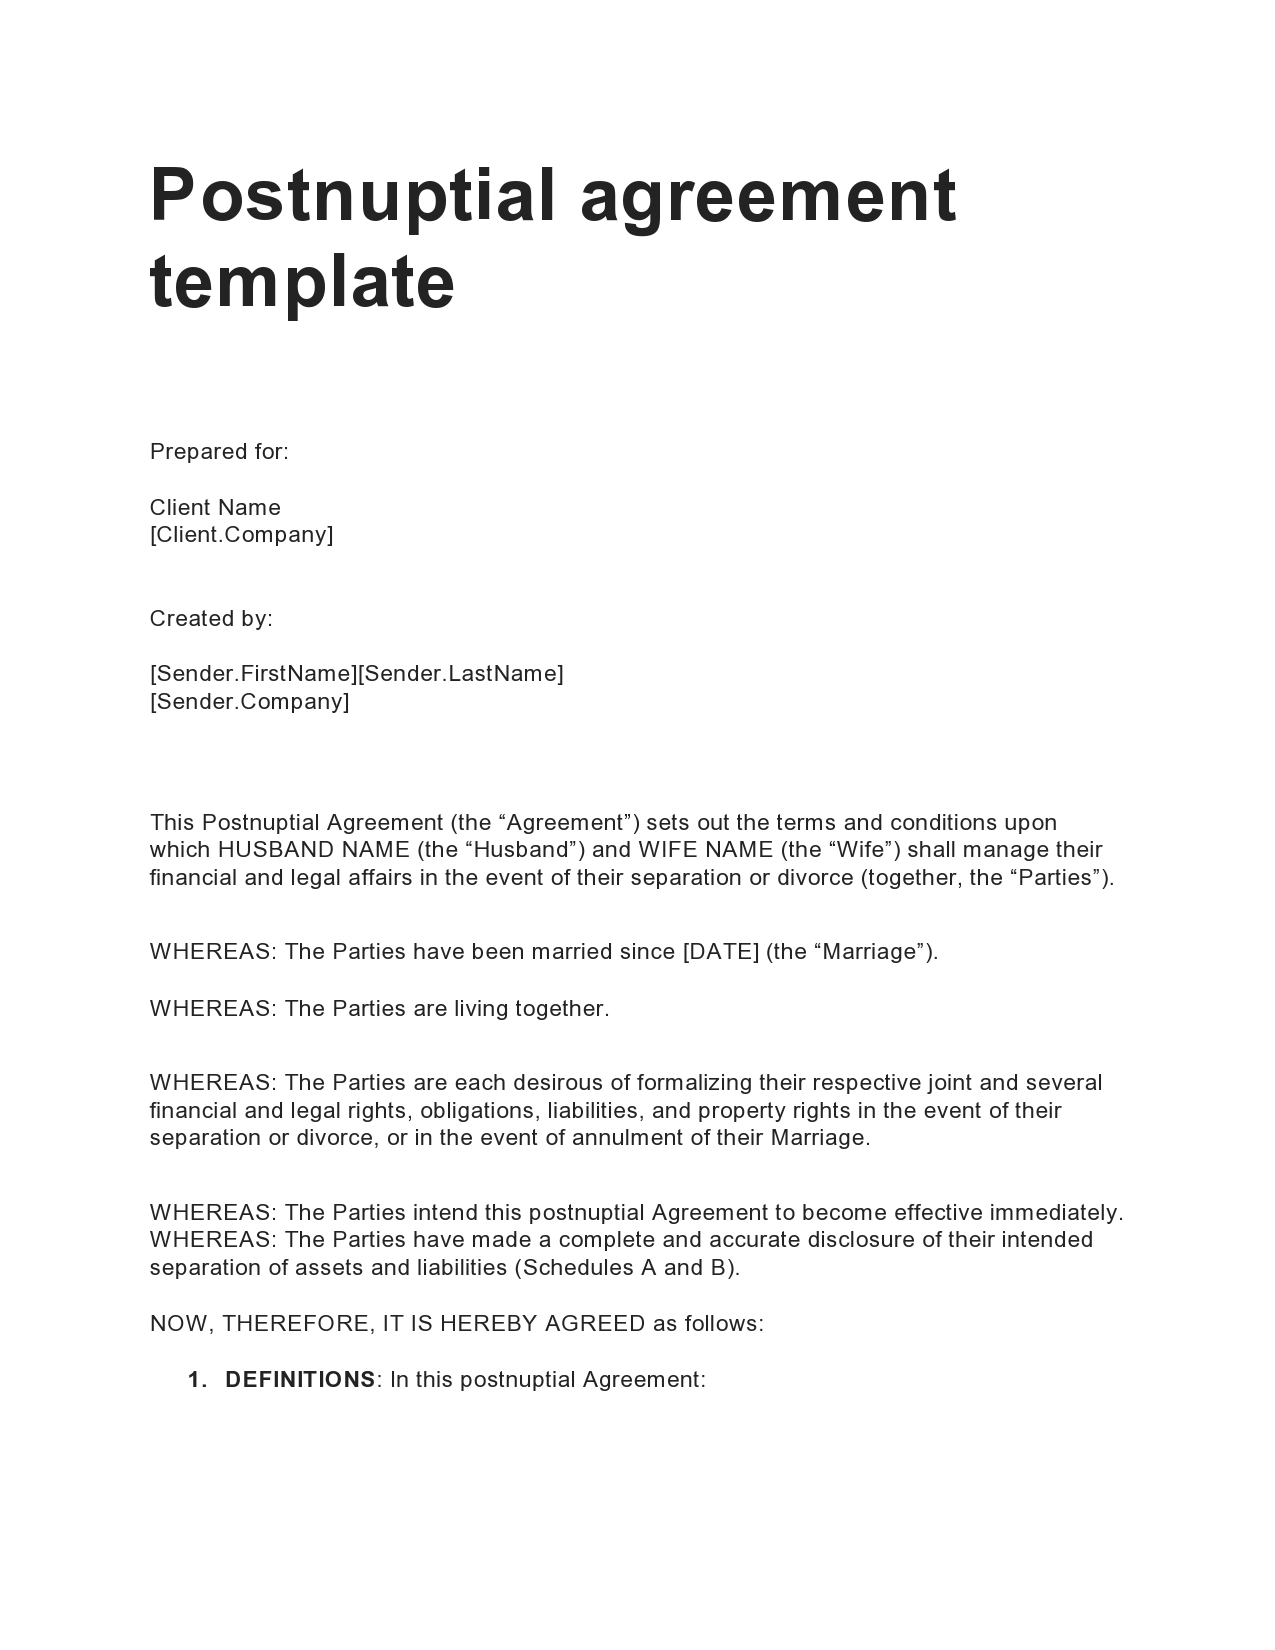 Free postnuptial agreement template 03